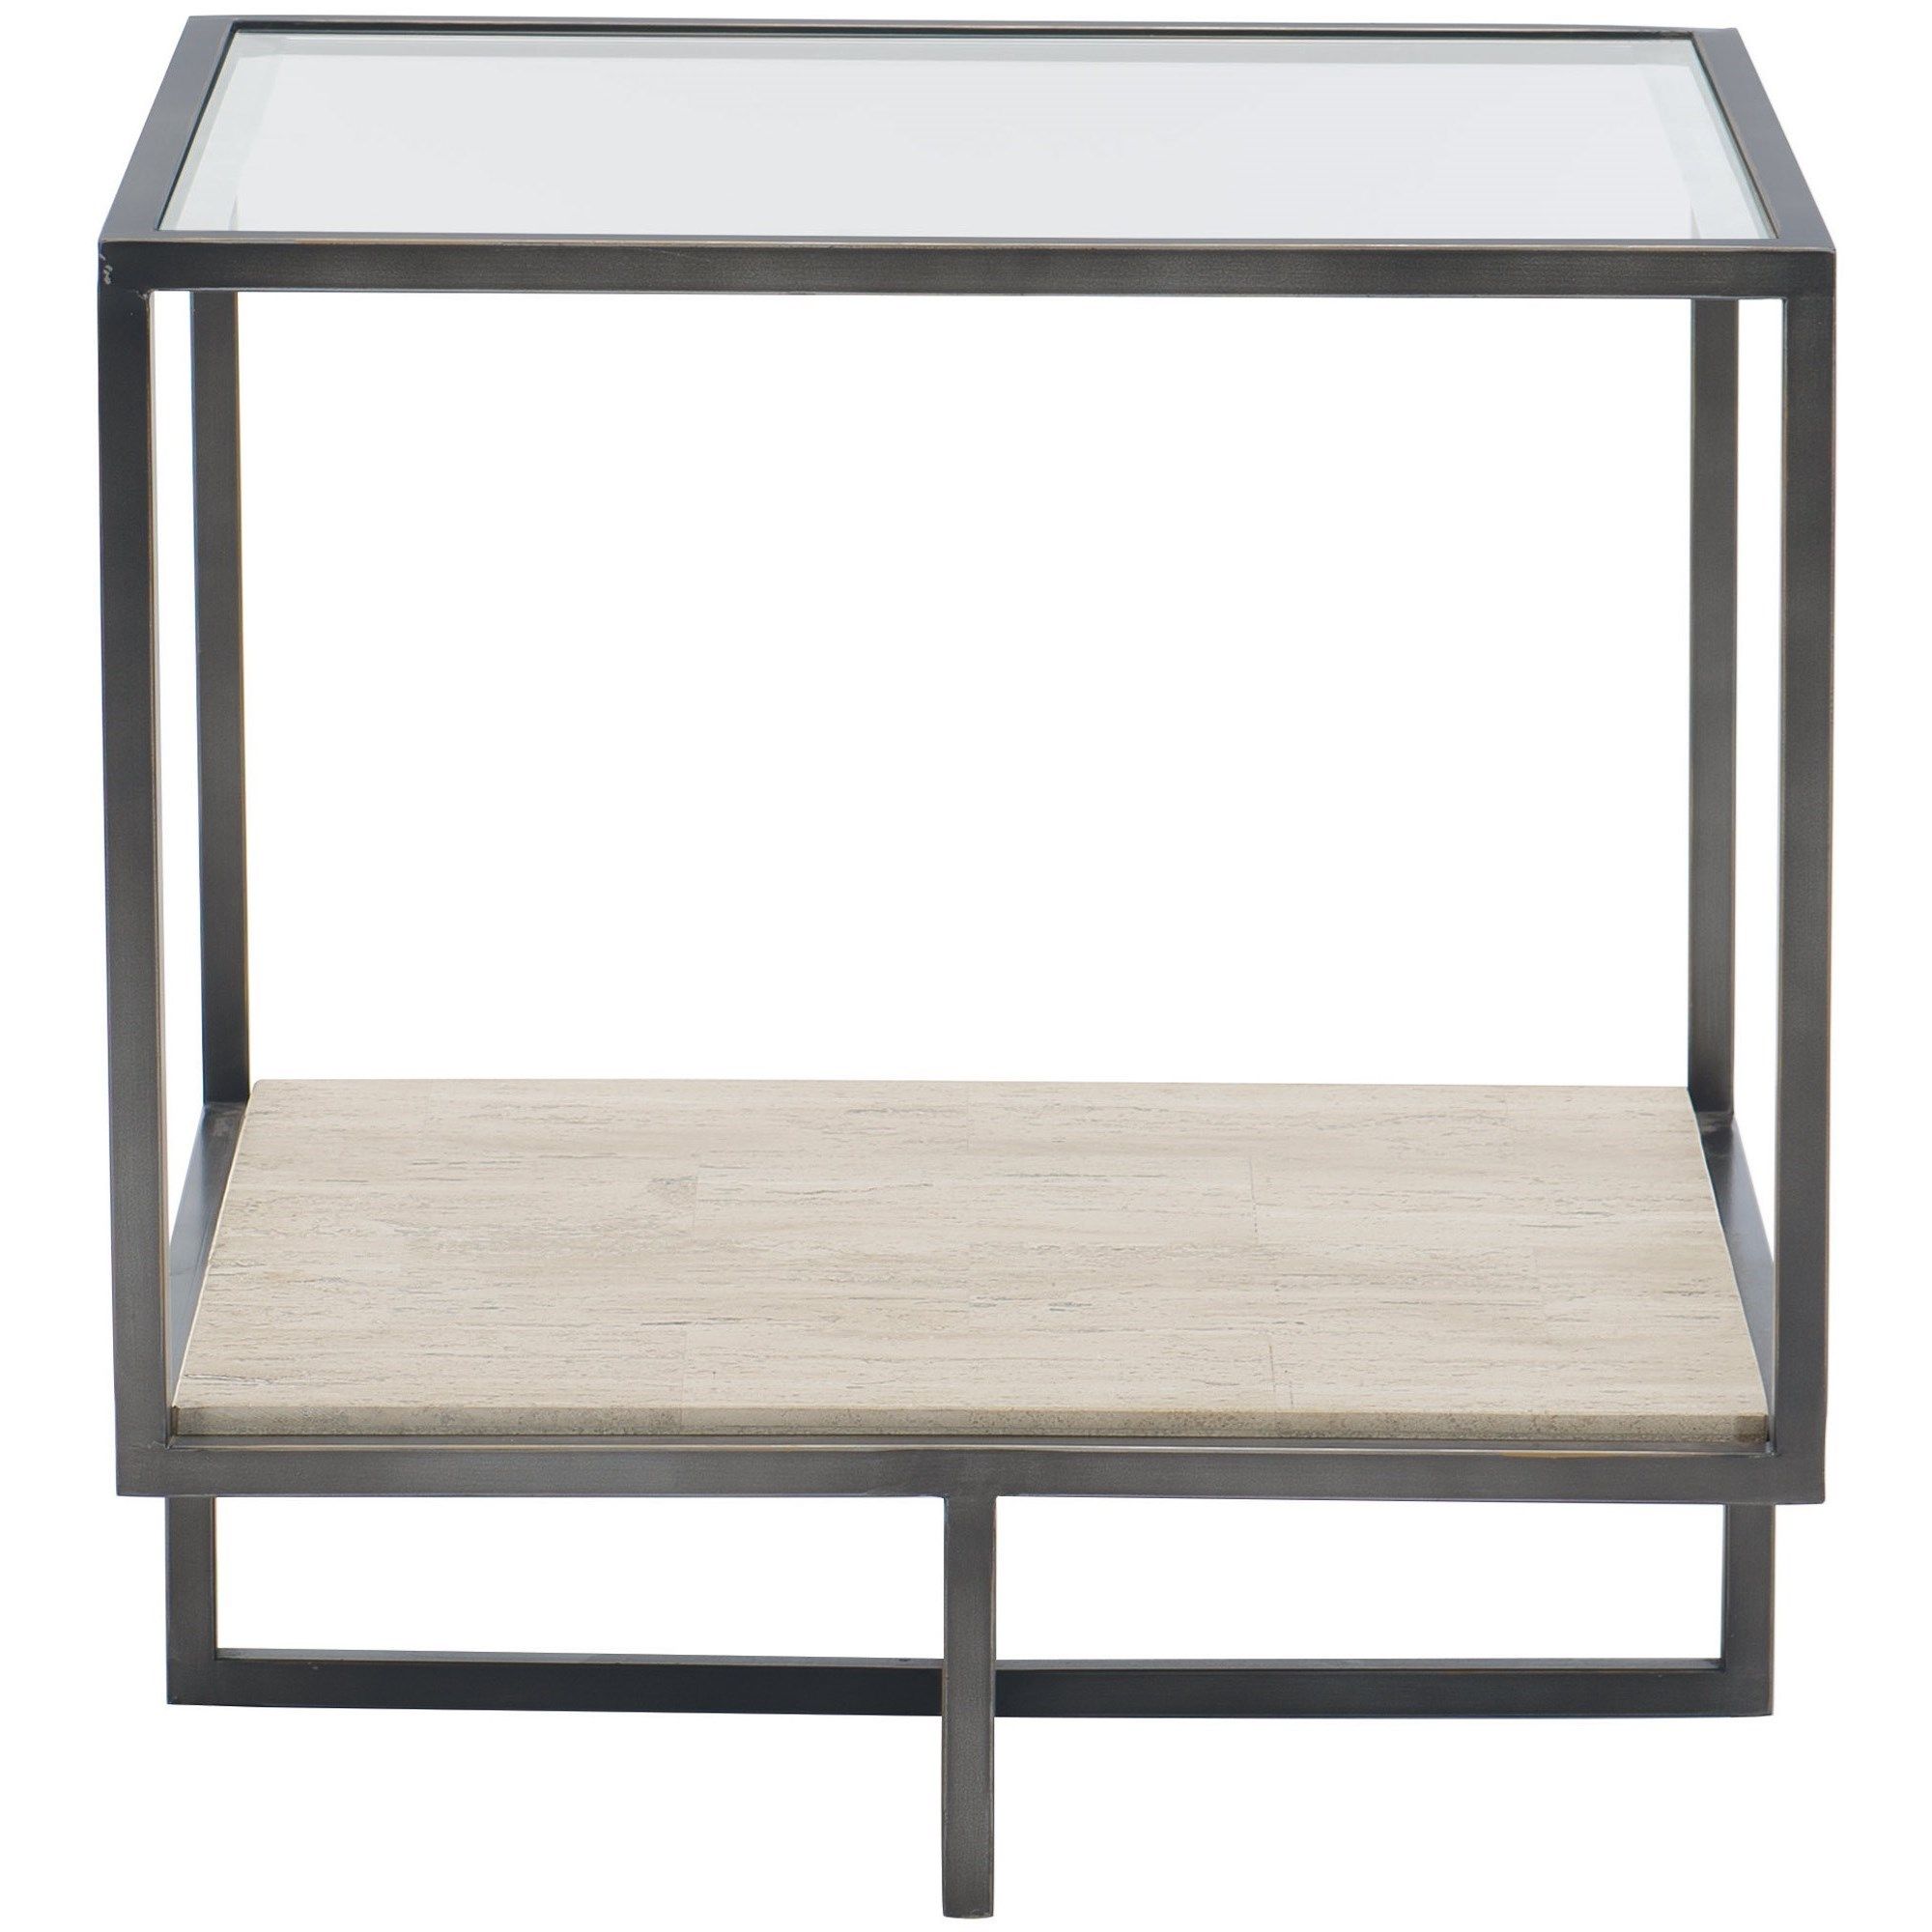 Bernhardt Harlow 514 121 Contemporary Metal Square End Throughout 1 Shelf Square Console Tables (View 5 of 20)